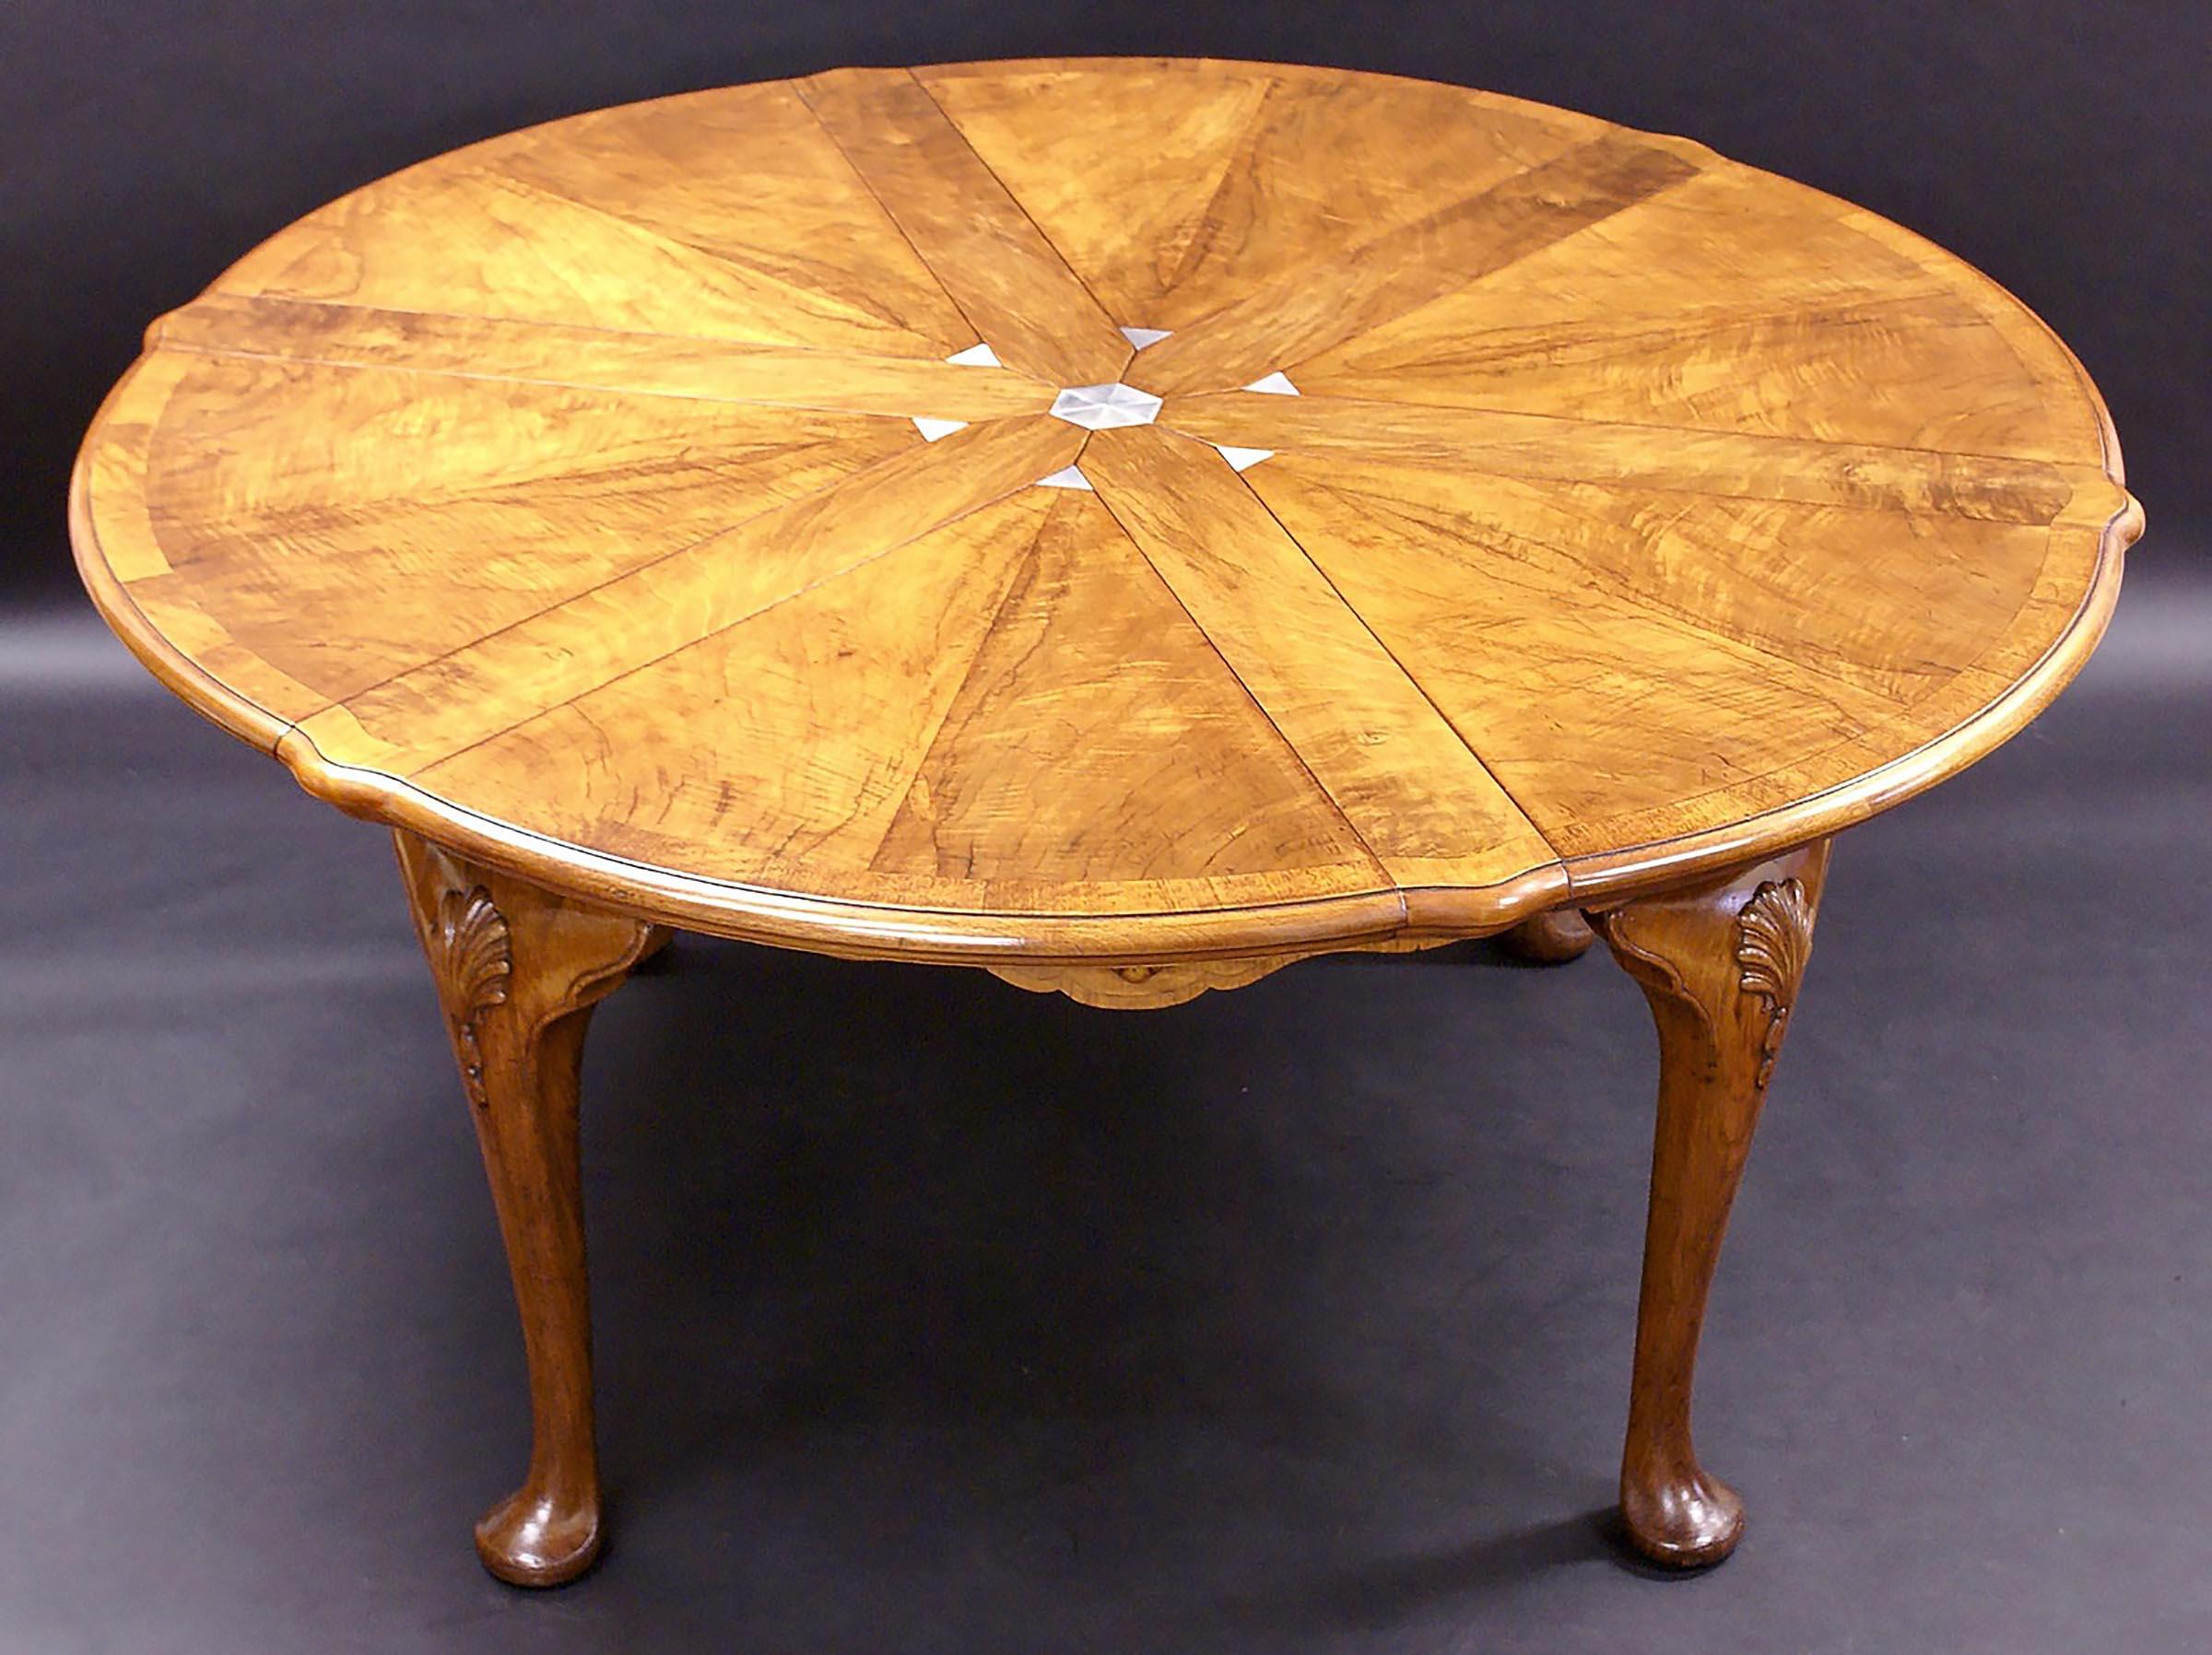 This stunning and very versatile figured walnut circular extending dining table was designed using the mechanism first patented by Robert Jupe in the 19th century. The table has two sets of leaves allowing it to be used in three different sizes. In